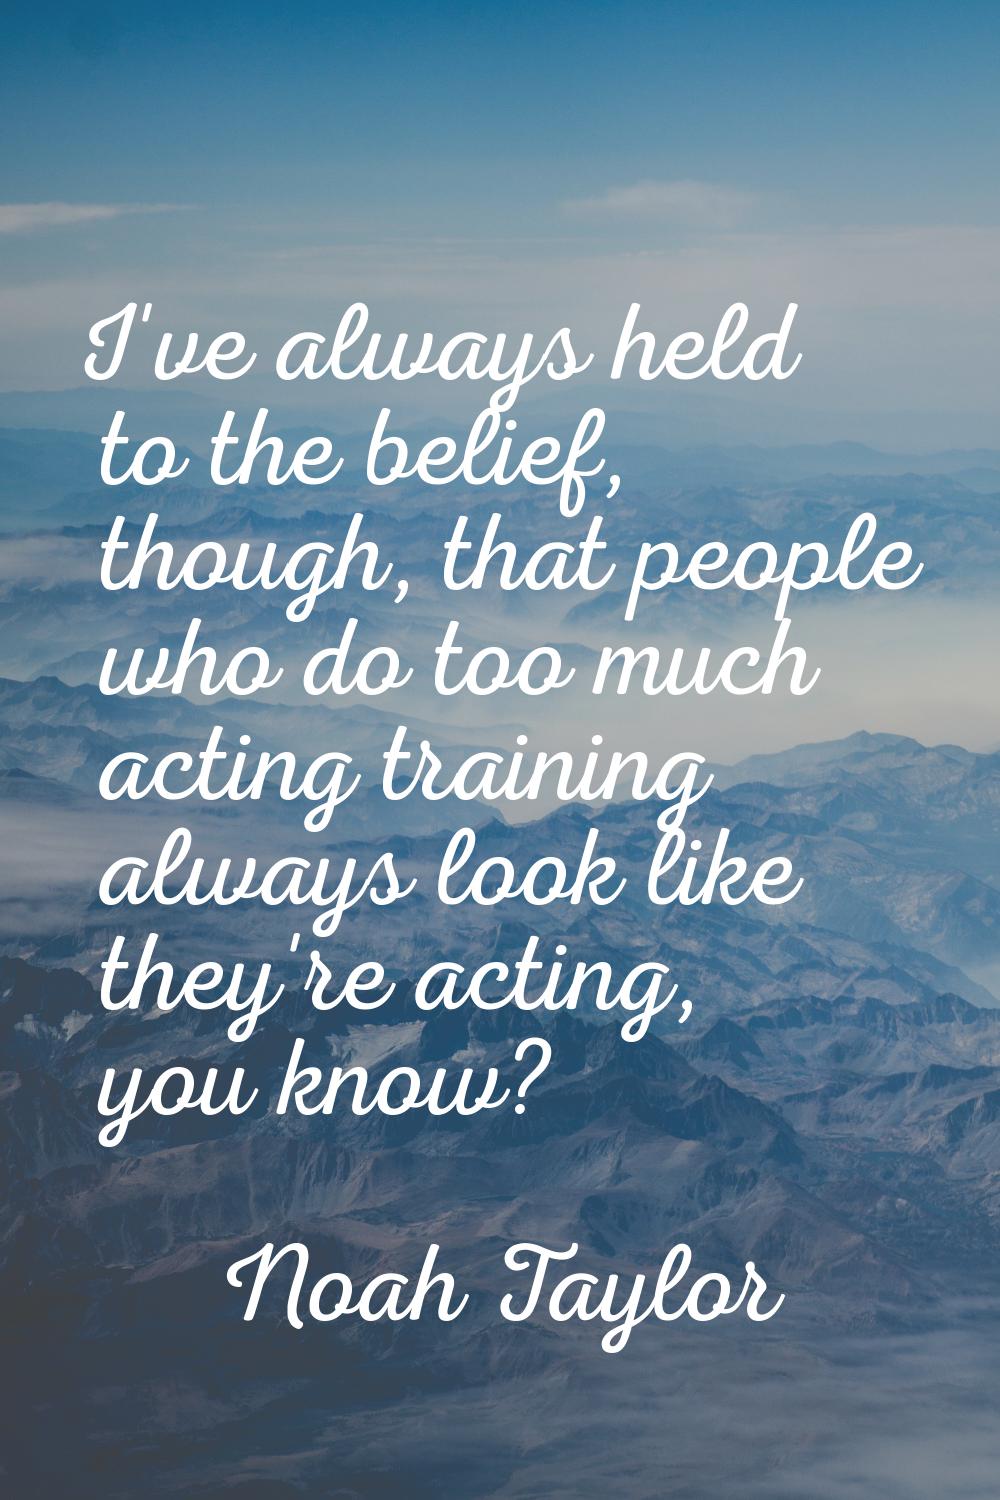 I've always held to the belief, though, that people who do too much acting training always look lik